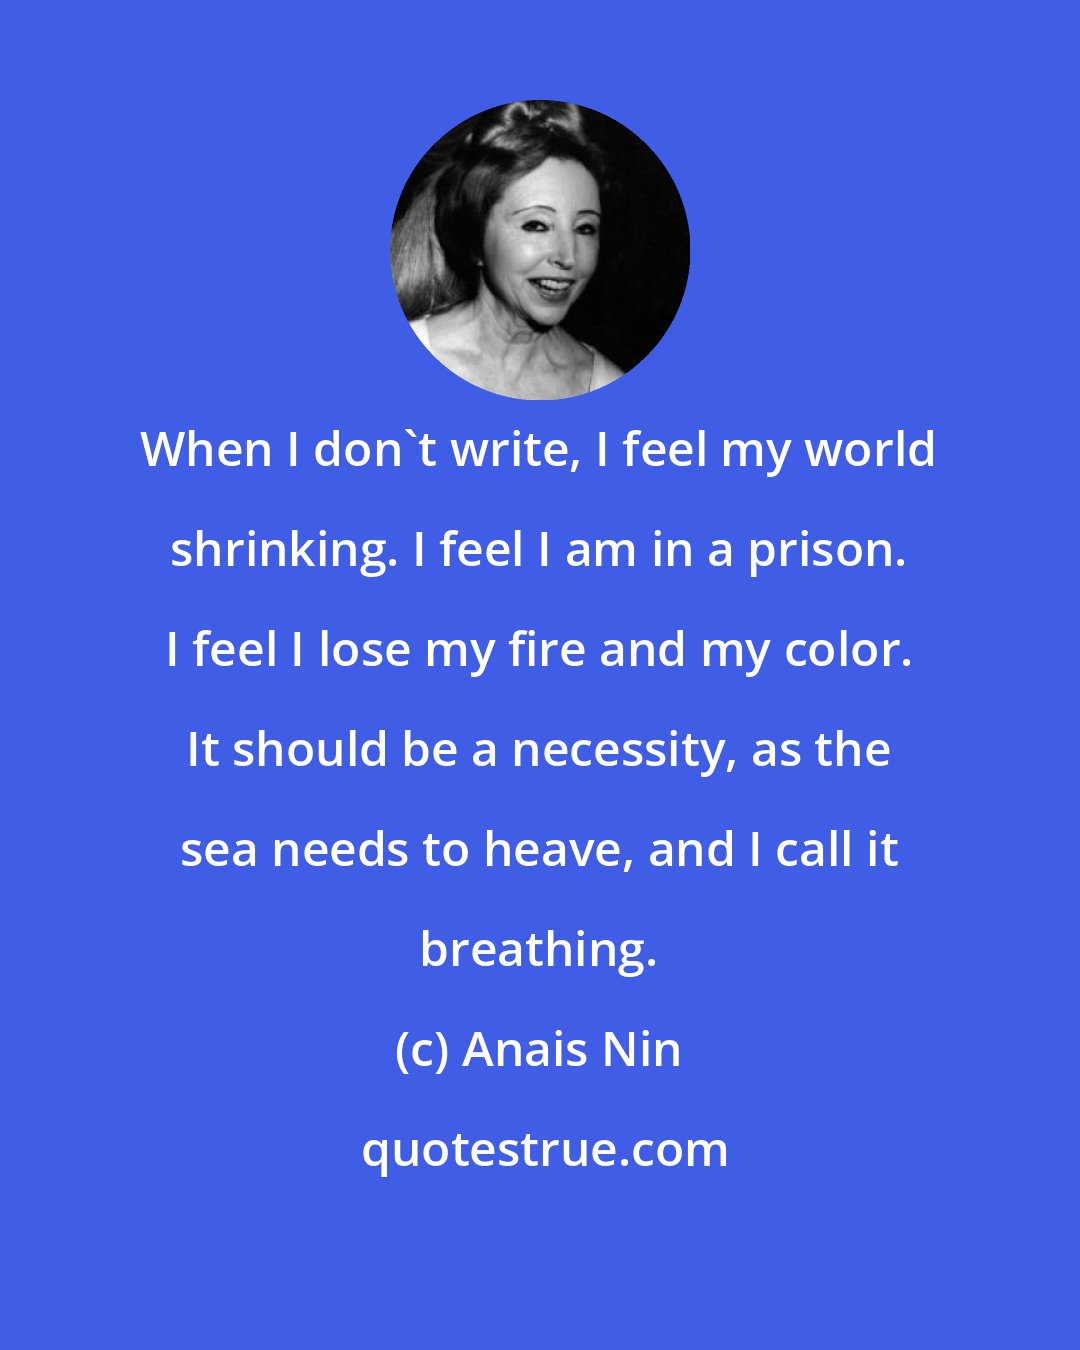 Anais Nin: When I don't write, I feel my world shrinking. I feel I am in a prison. I feel I lose my fire and my color. It should be a necessity, as the sea needs to heave, and I call it breathing.